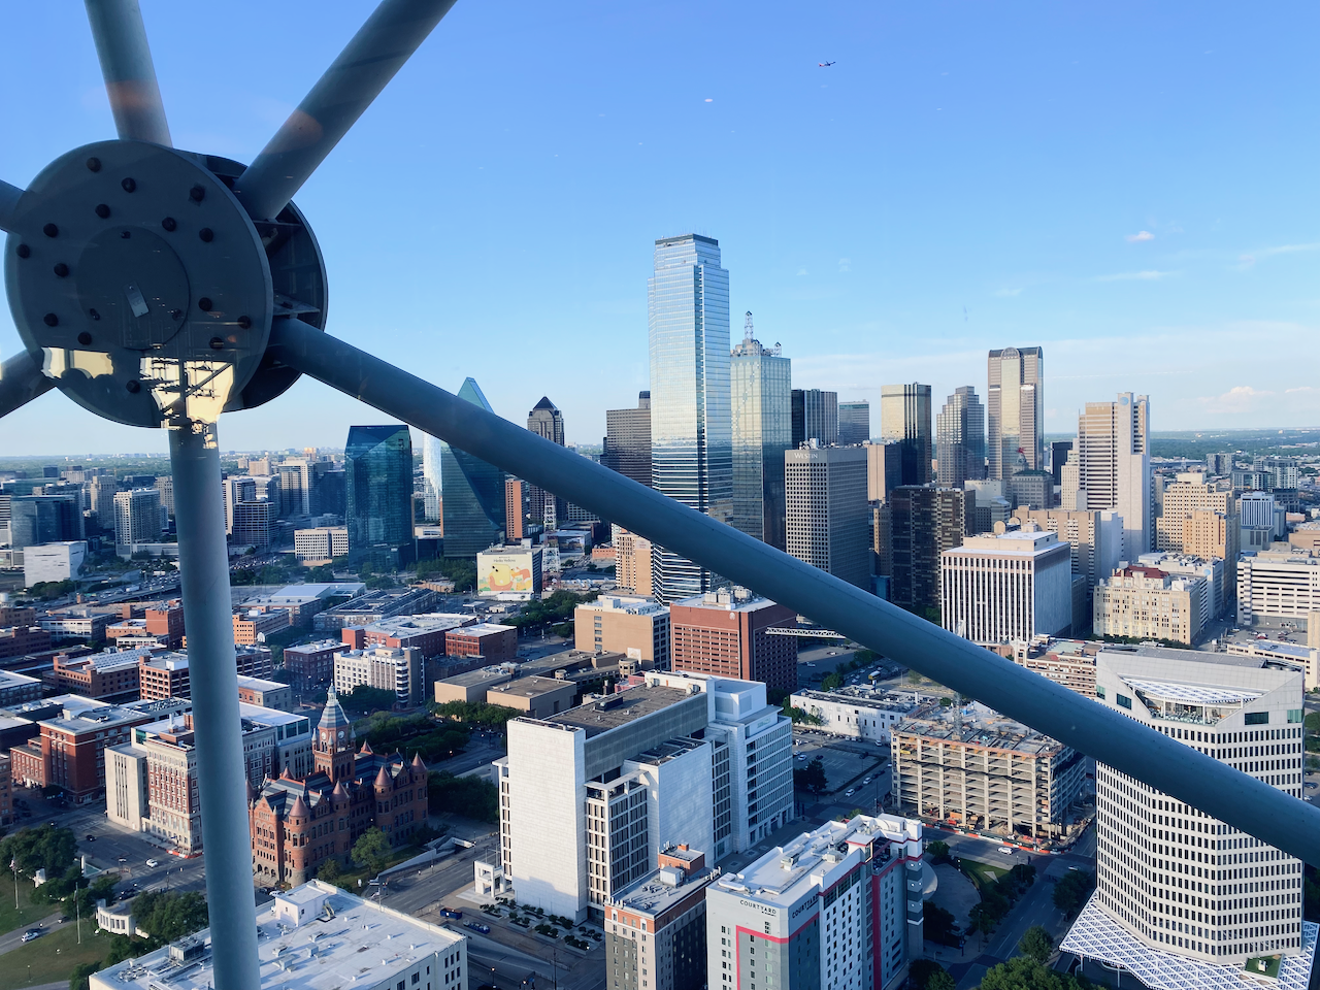 Reunion Tower is worth a visit every now and again, even though the restaurant in it doesn't spin.